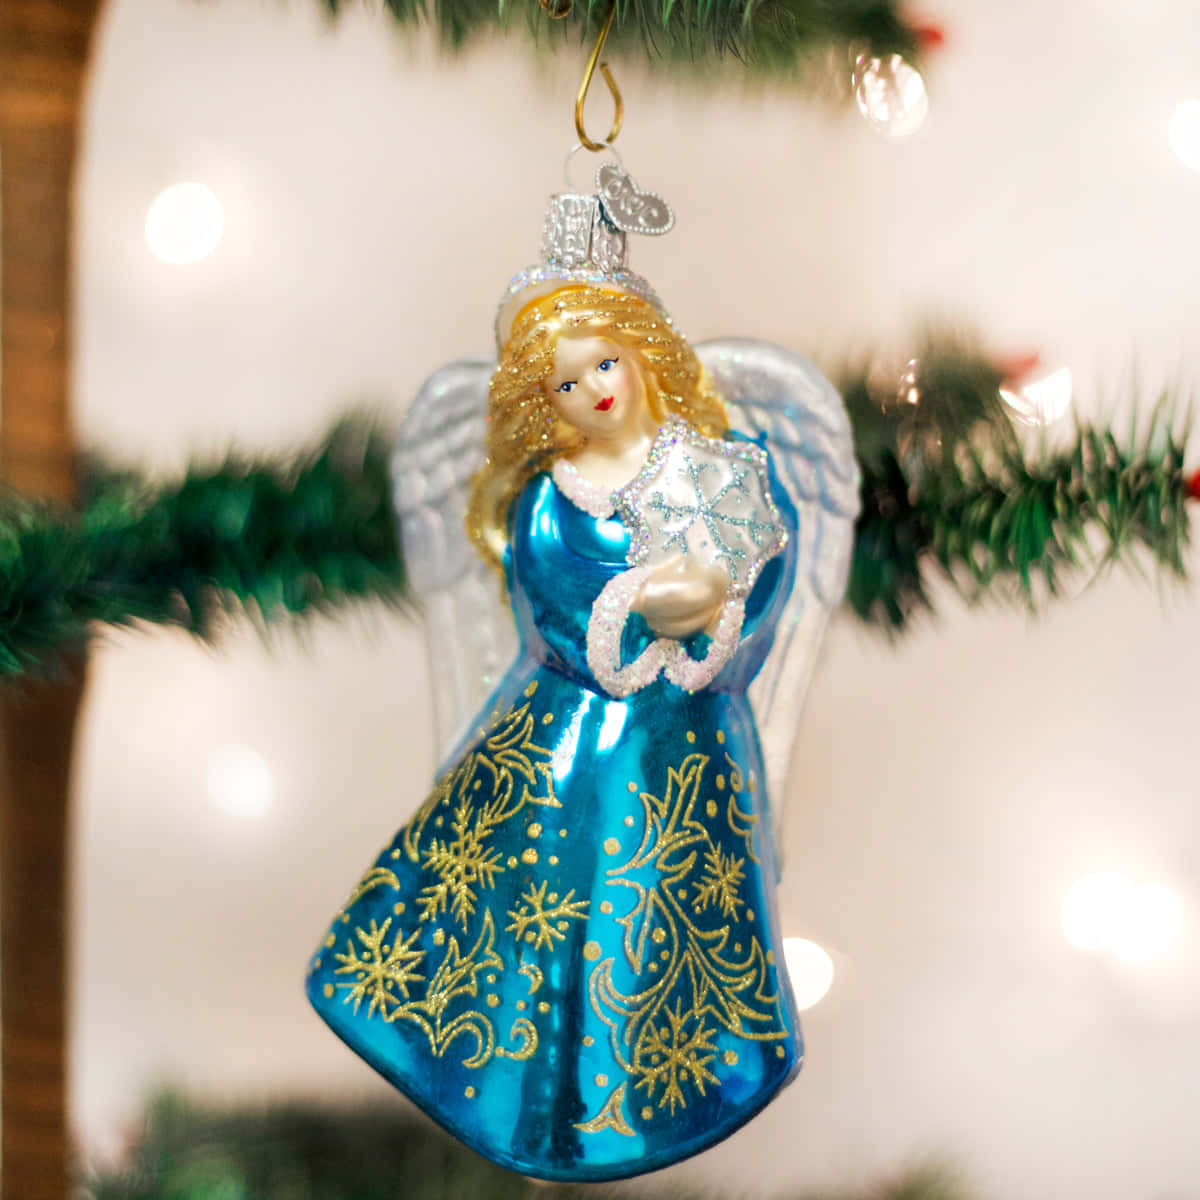 A Blue Glass Angel Ornament Hanging From A Tree